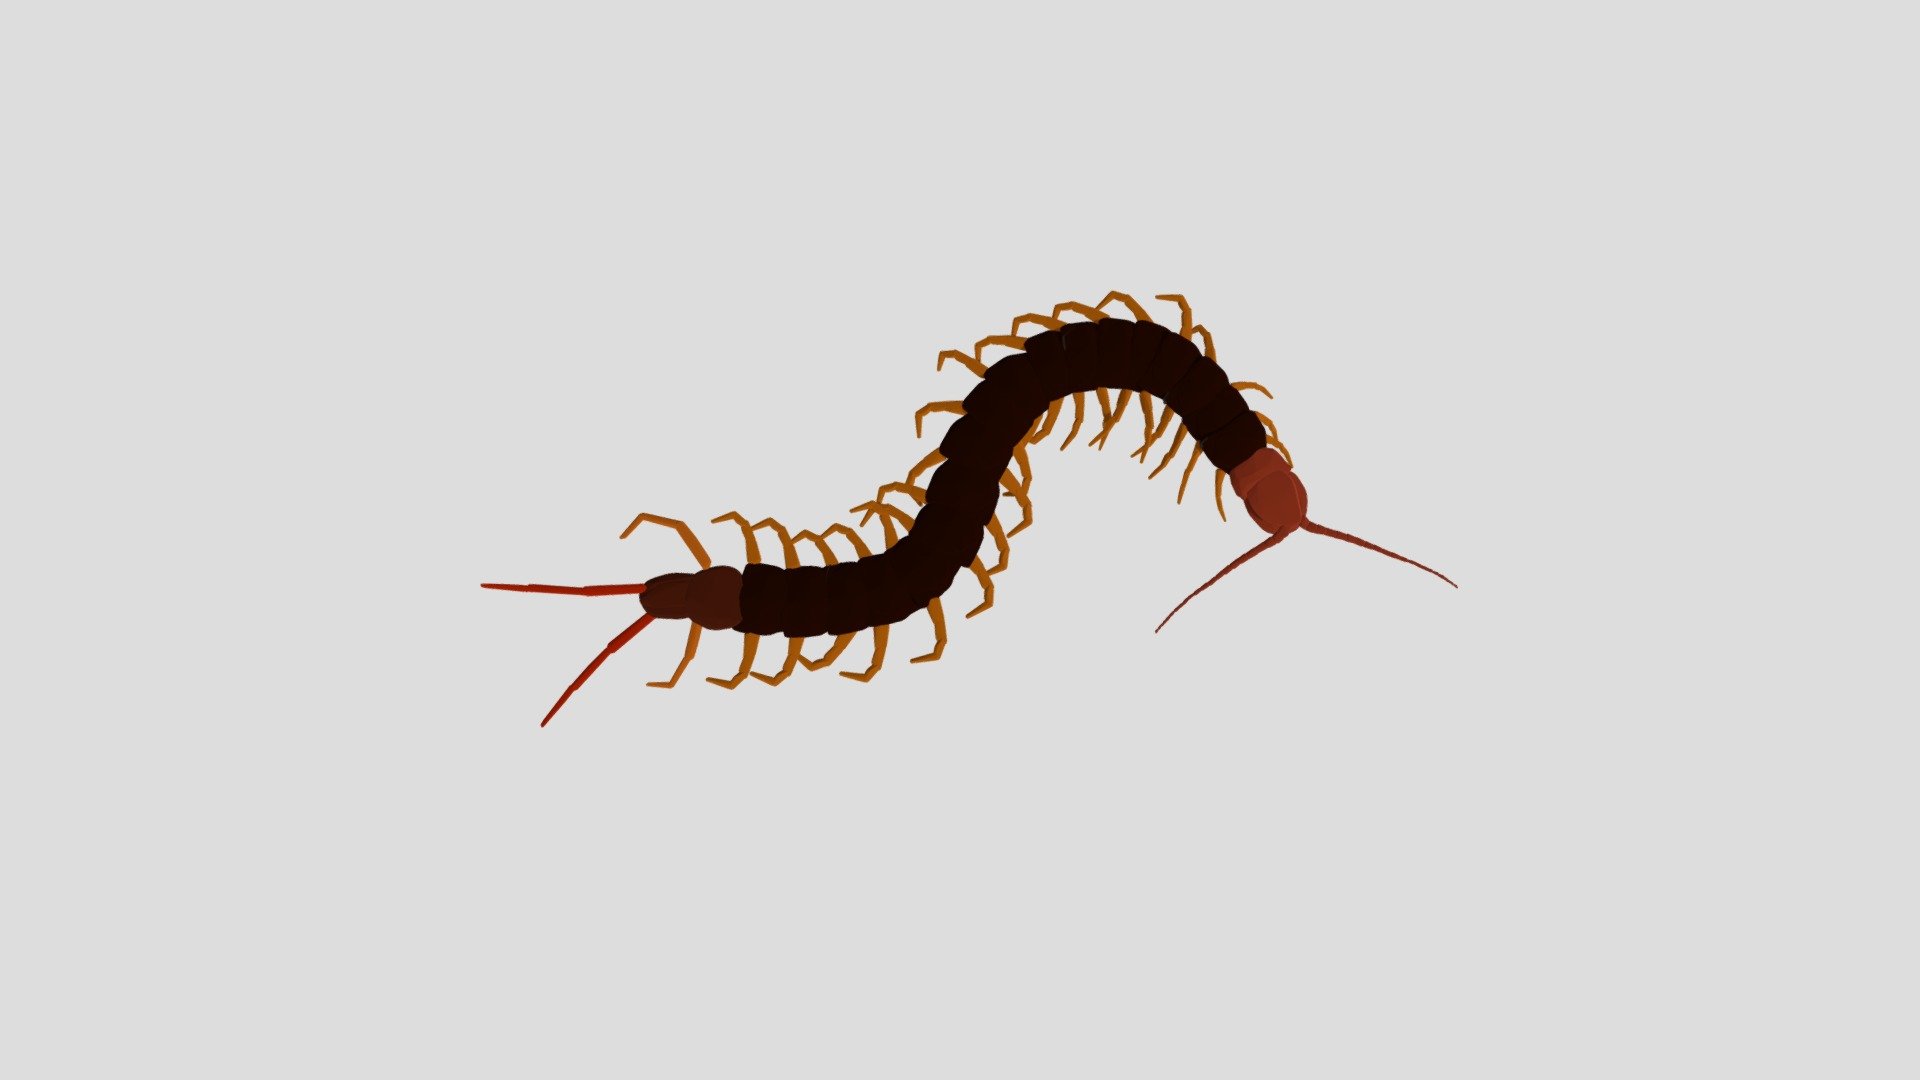 Centipede - 3D model by NCState_DELTA (@NCState) [f373a4e] - Sketchfab